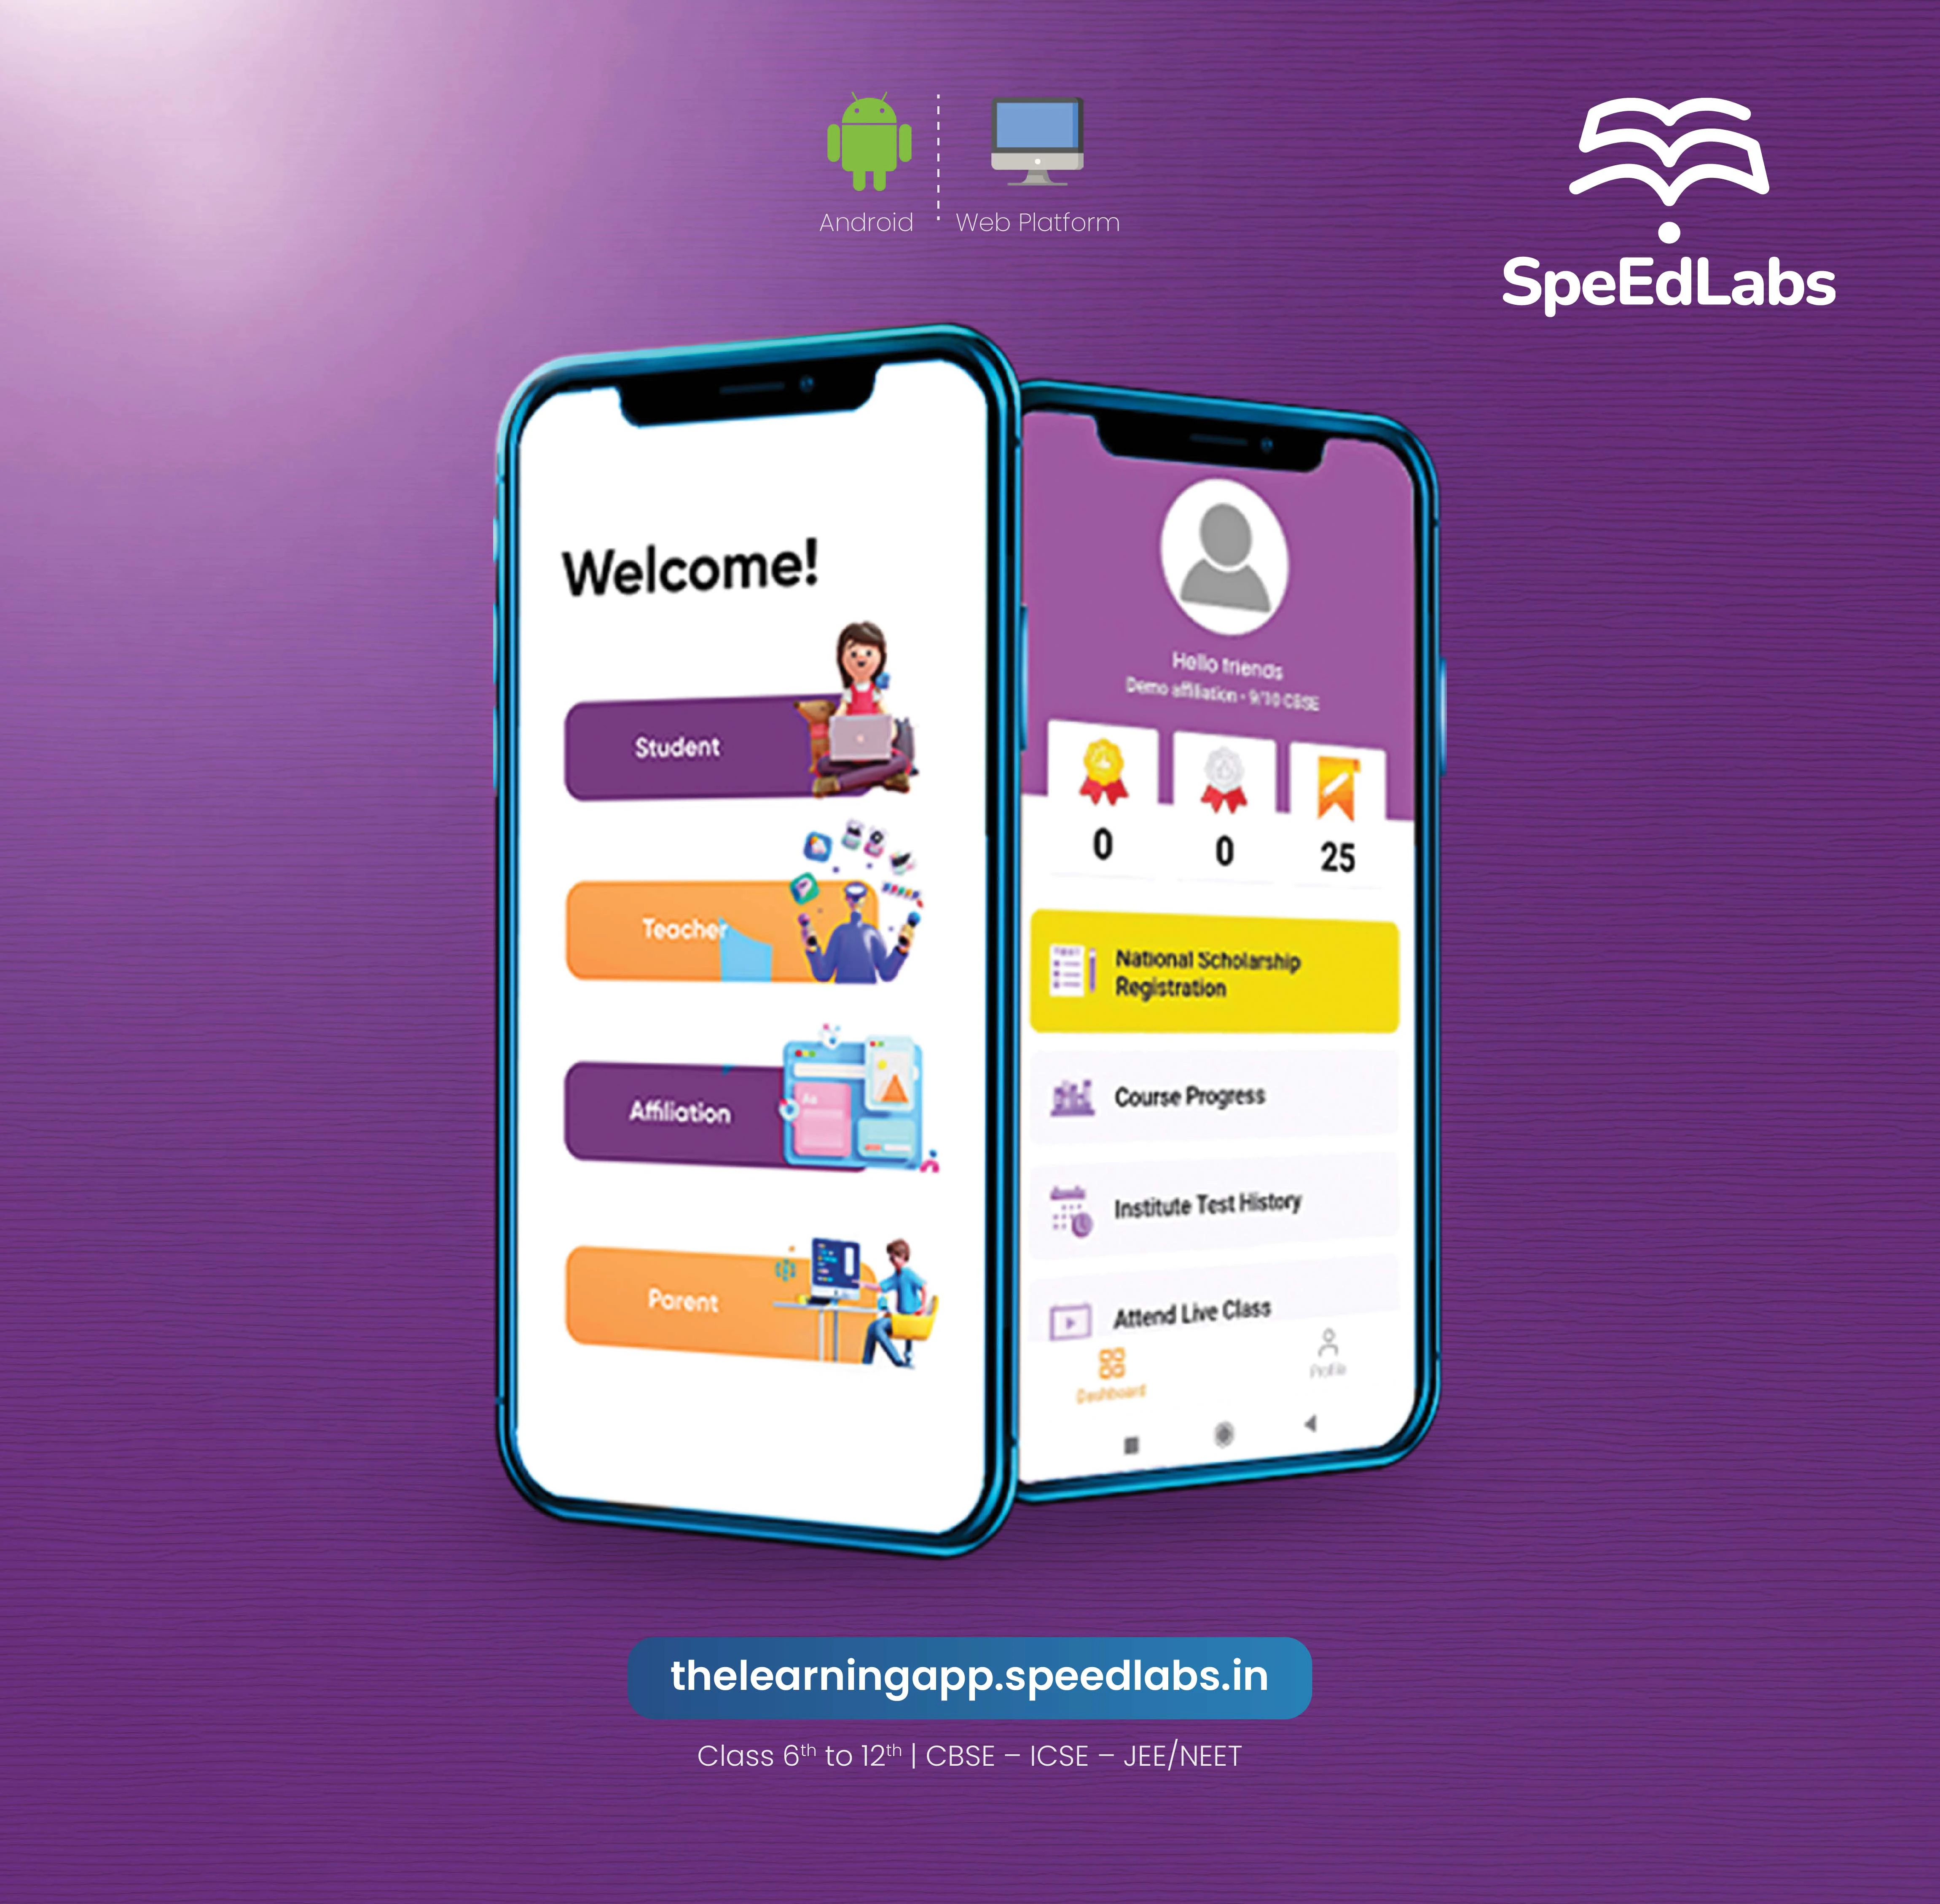 SpeEdLabs takes students closer to better scores ahead of board exams